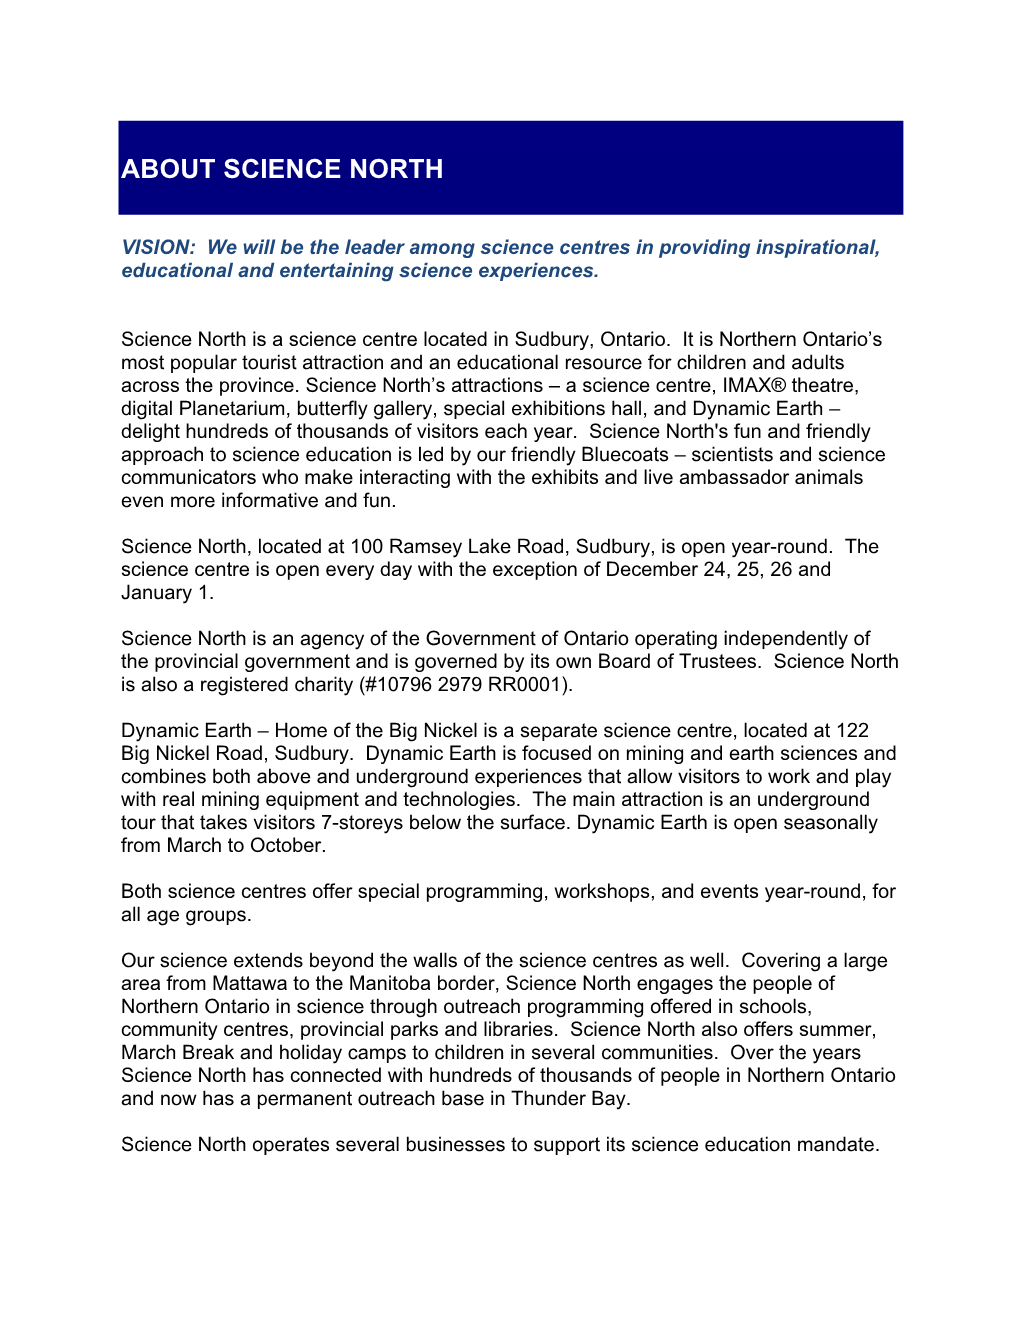 About Science North